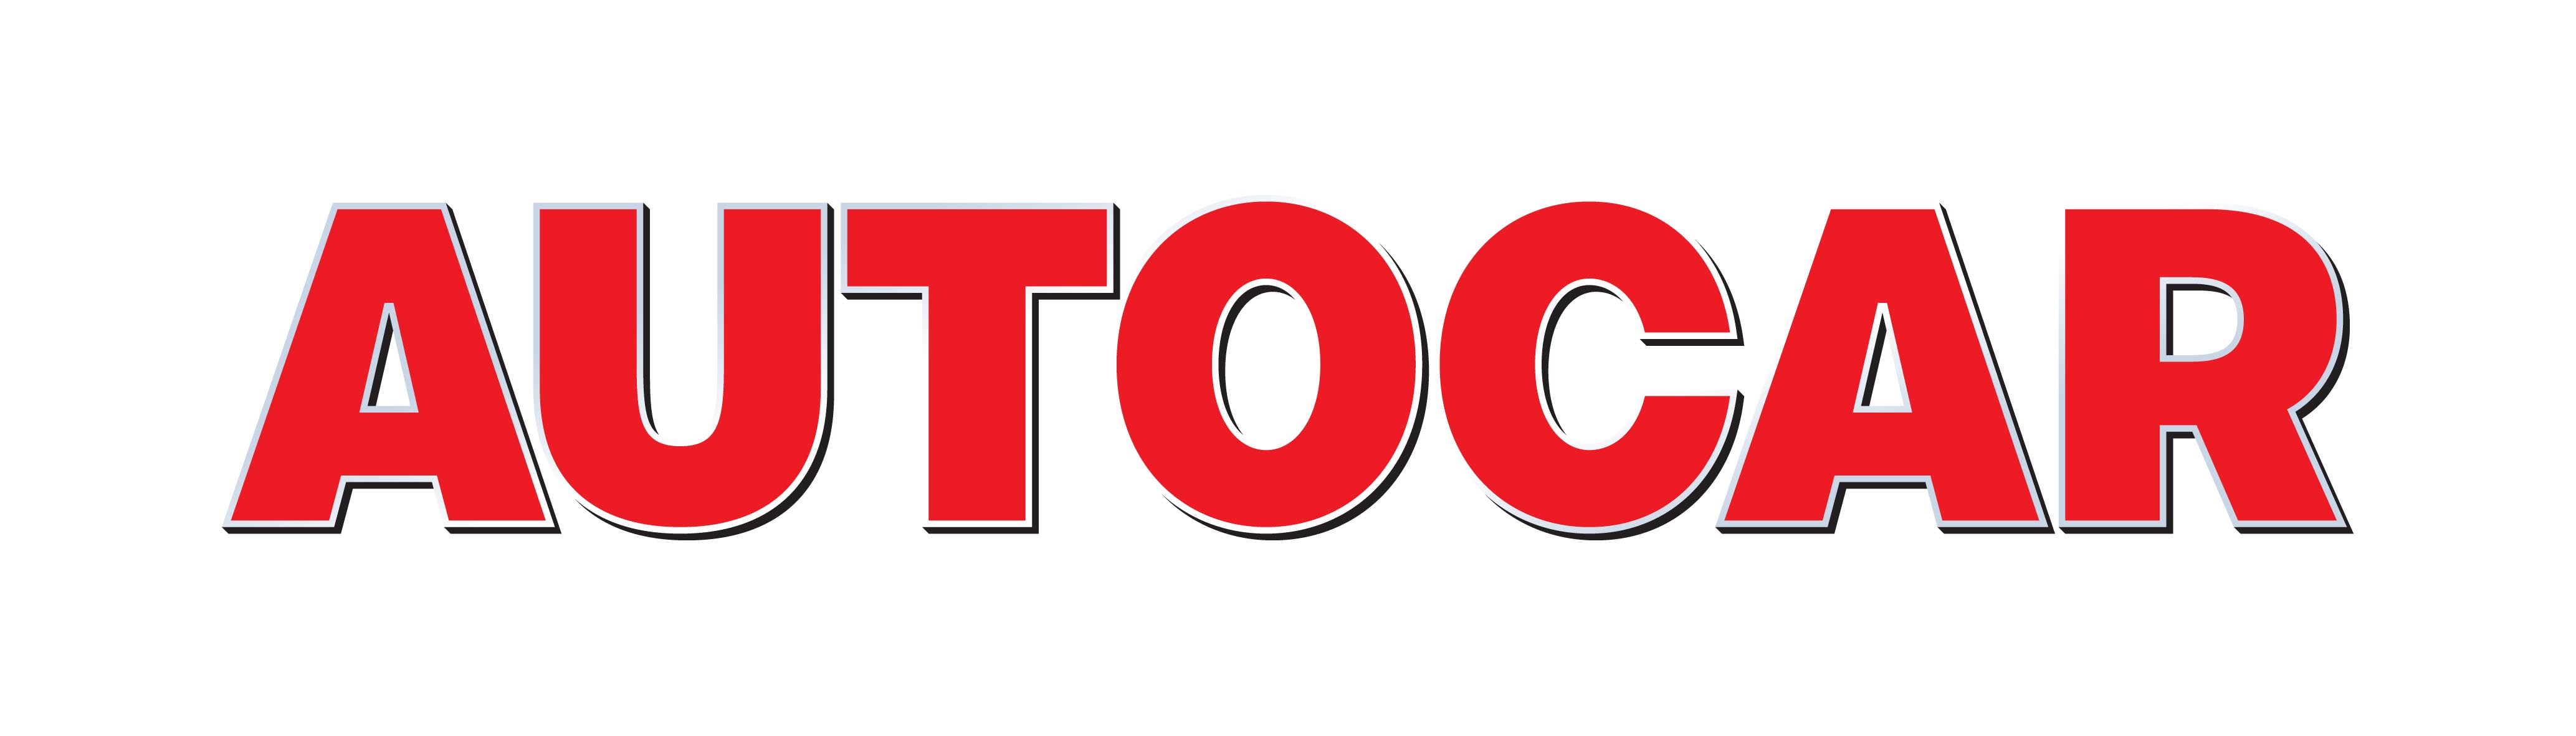 New look for autocar.co.uk | Autocar